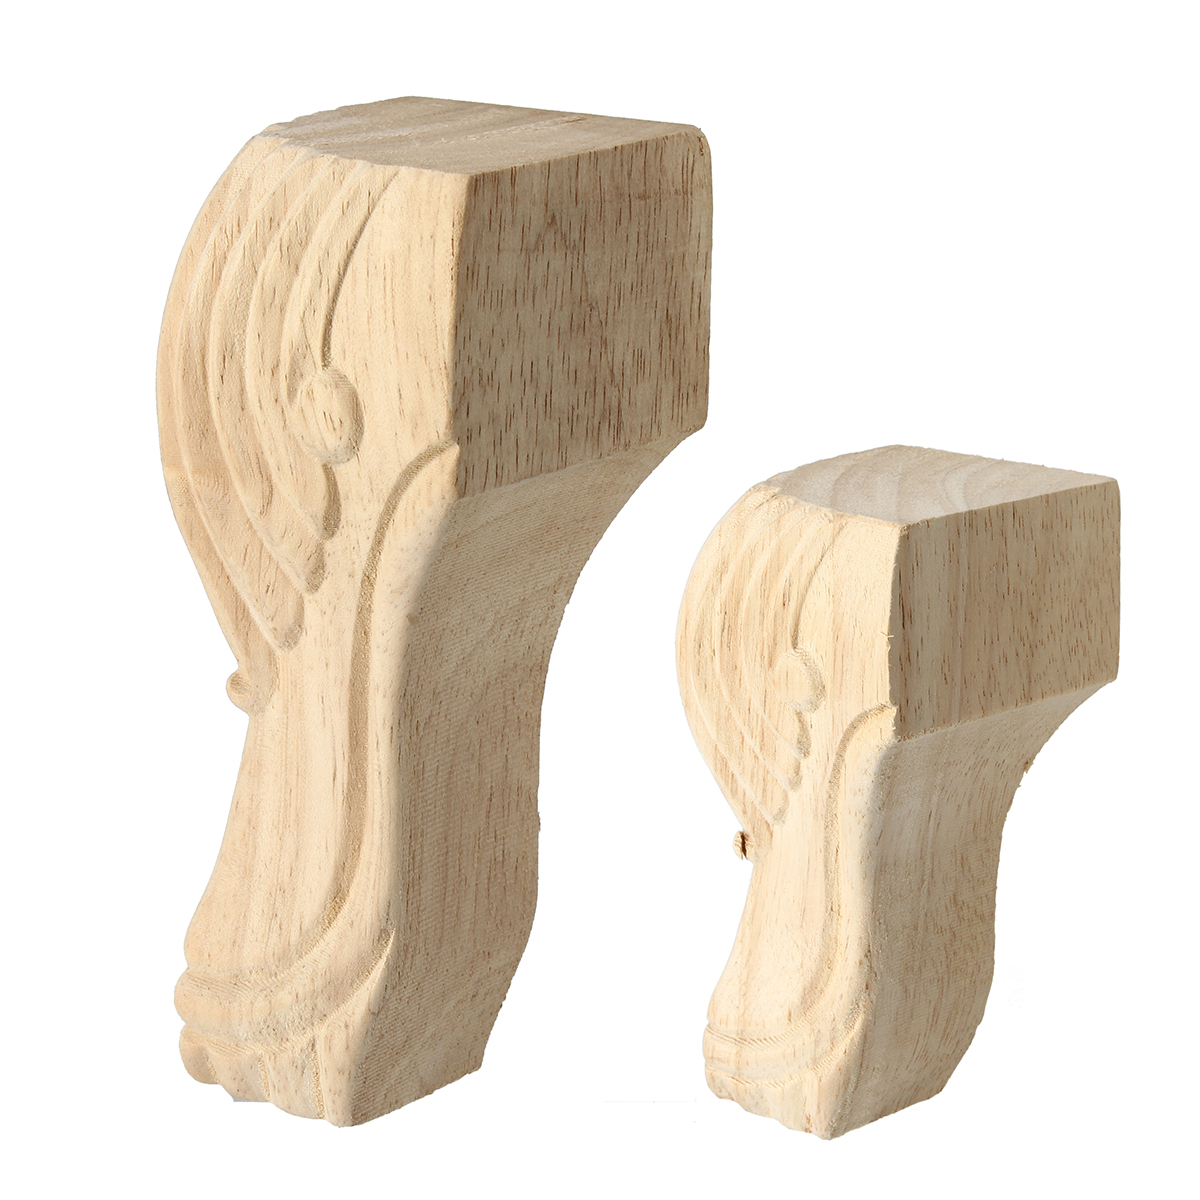 4Pcs-1015cm-European-Solid-Wood-Carving-Furniture-Foot-Legs-Unpainted-Couch-Cabinet-Sofa-Seat-Feets-1321345-2